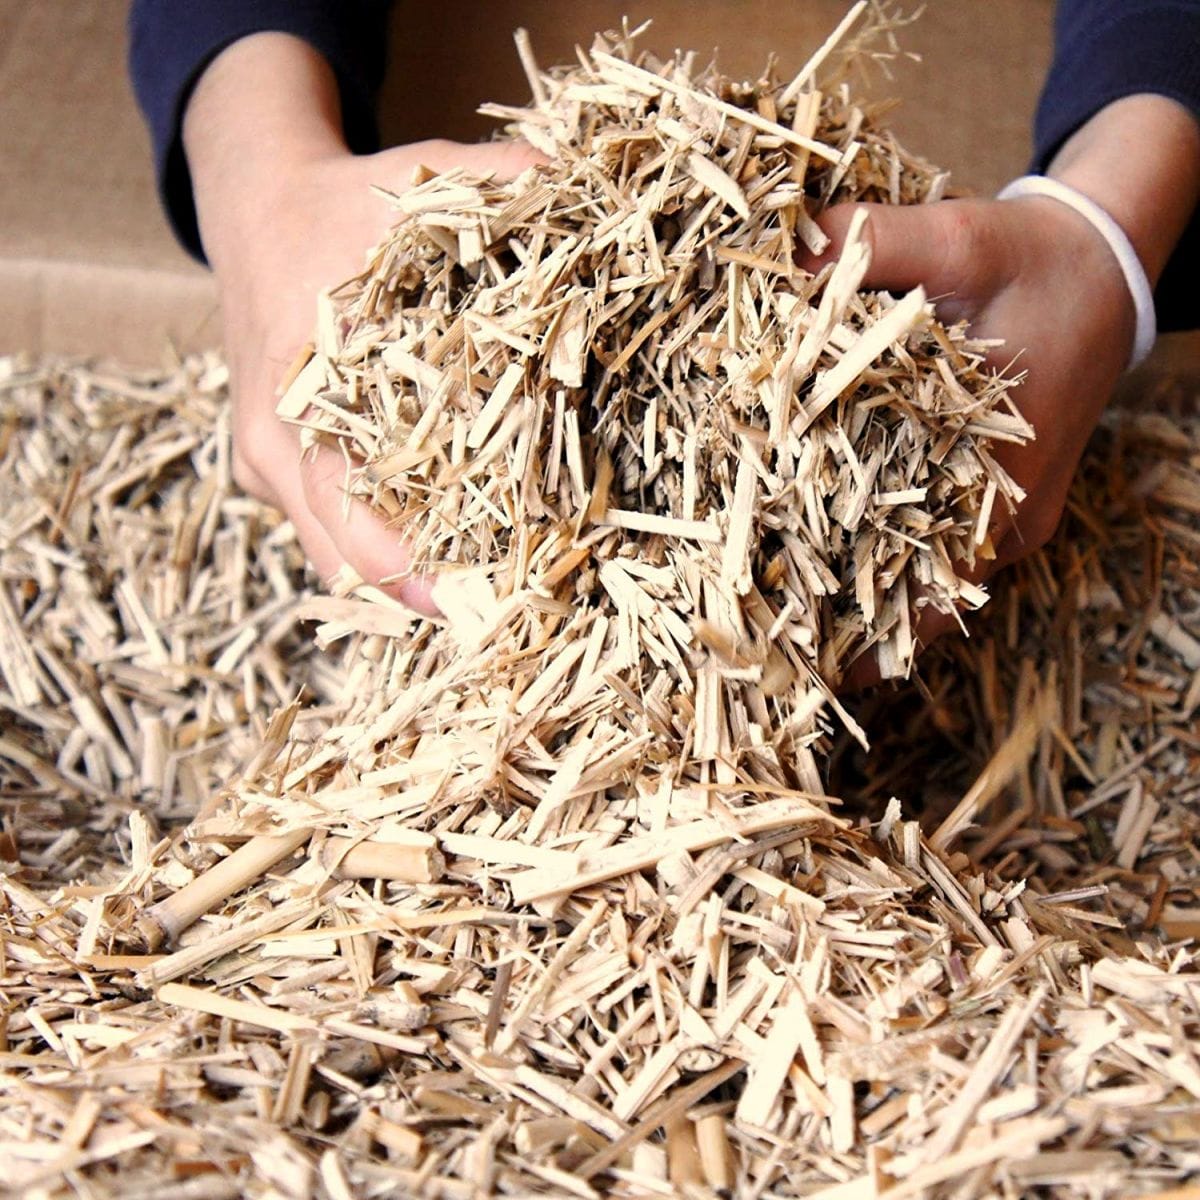 crushed miscanthus